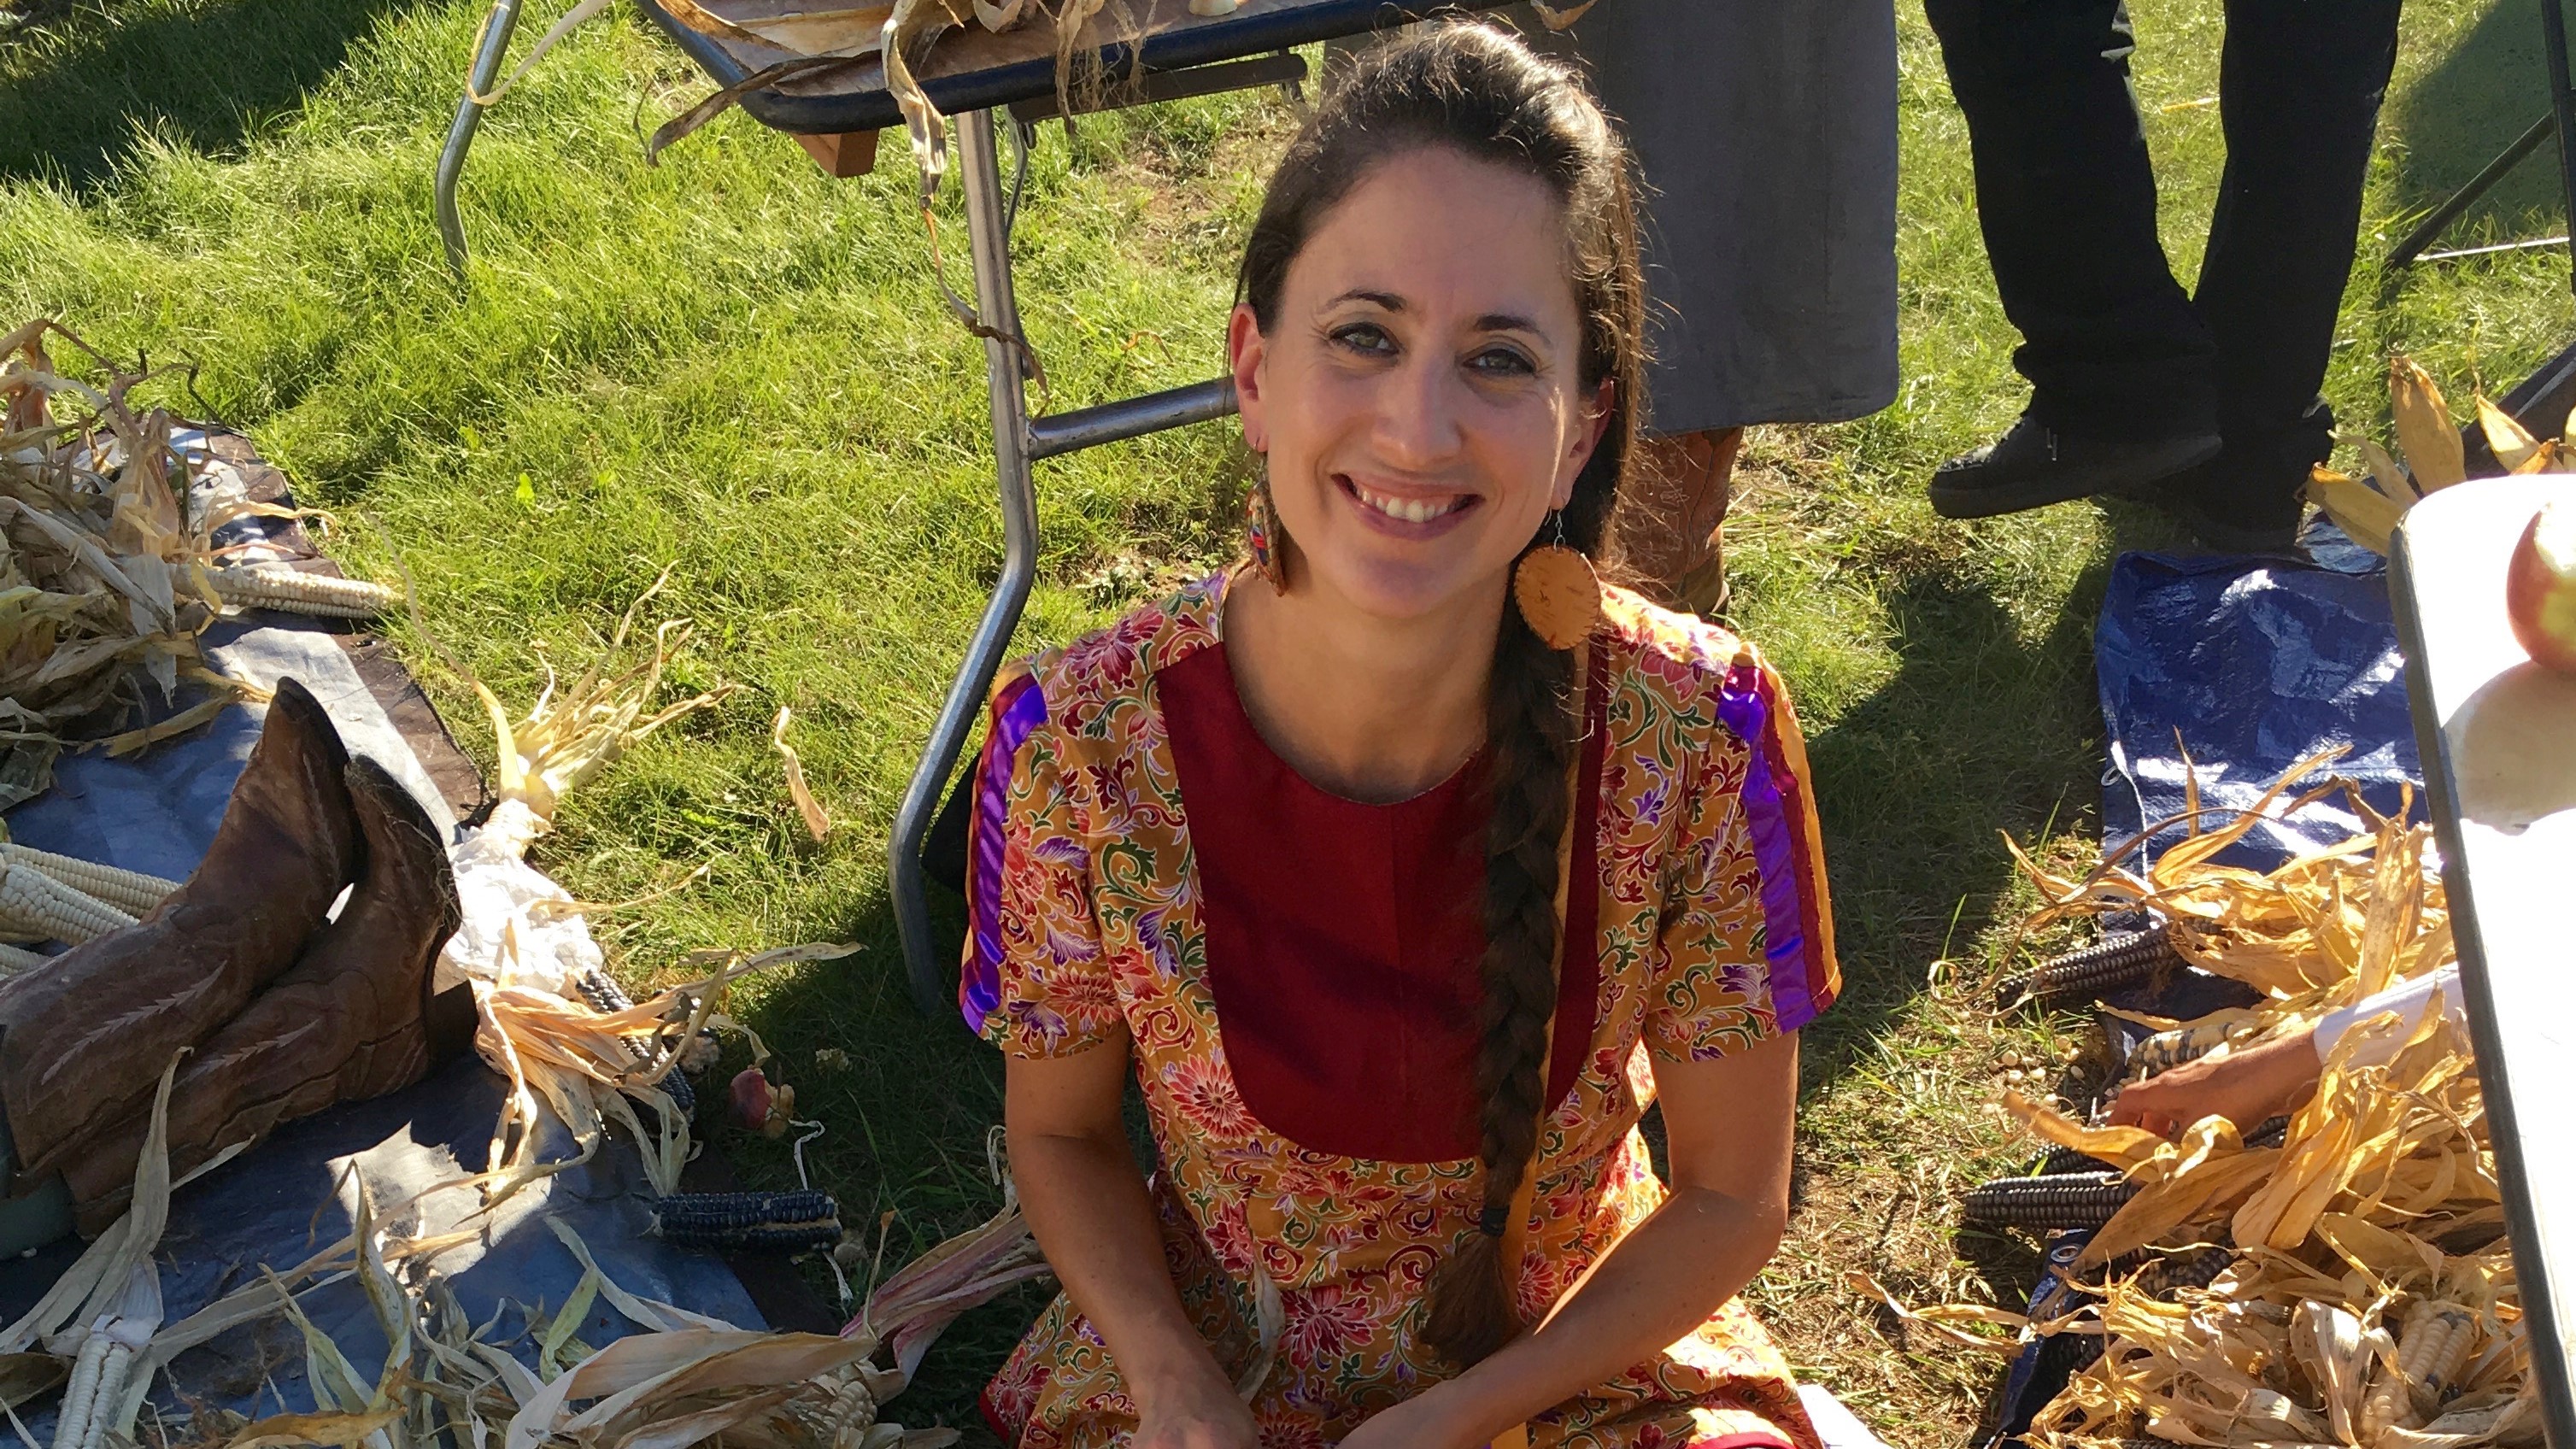 Seeds and Food Sovereignty, a Conversation with Elizabeth Hoover